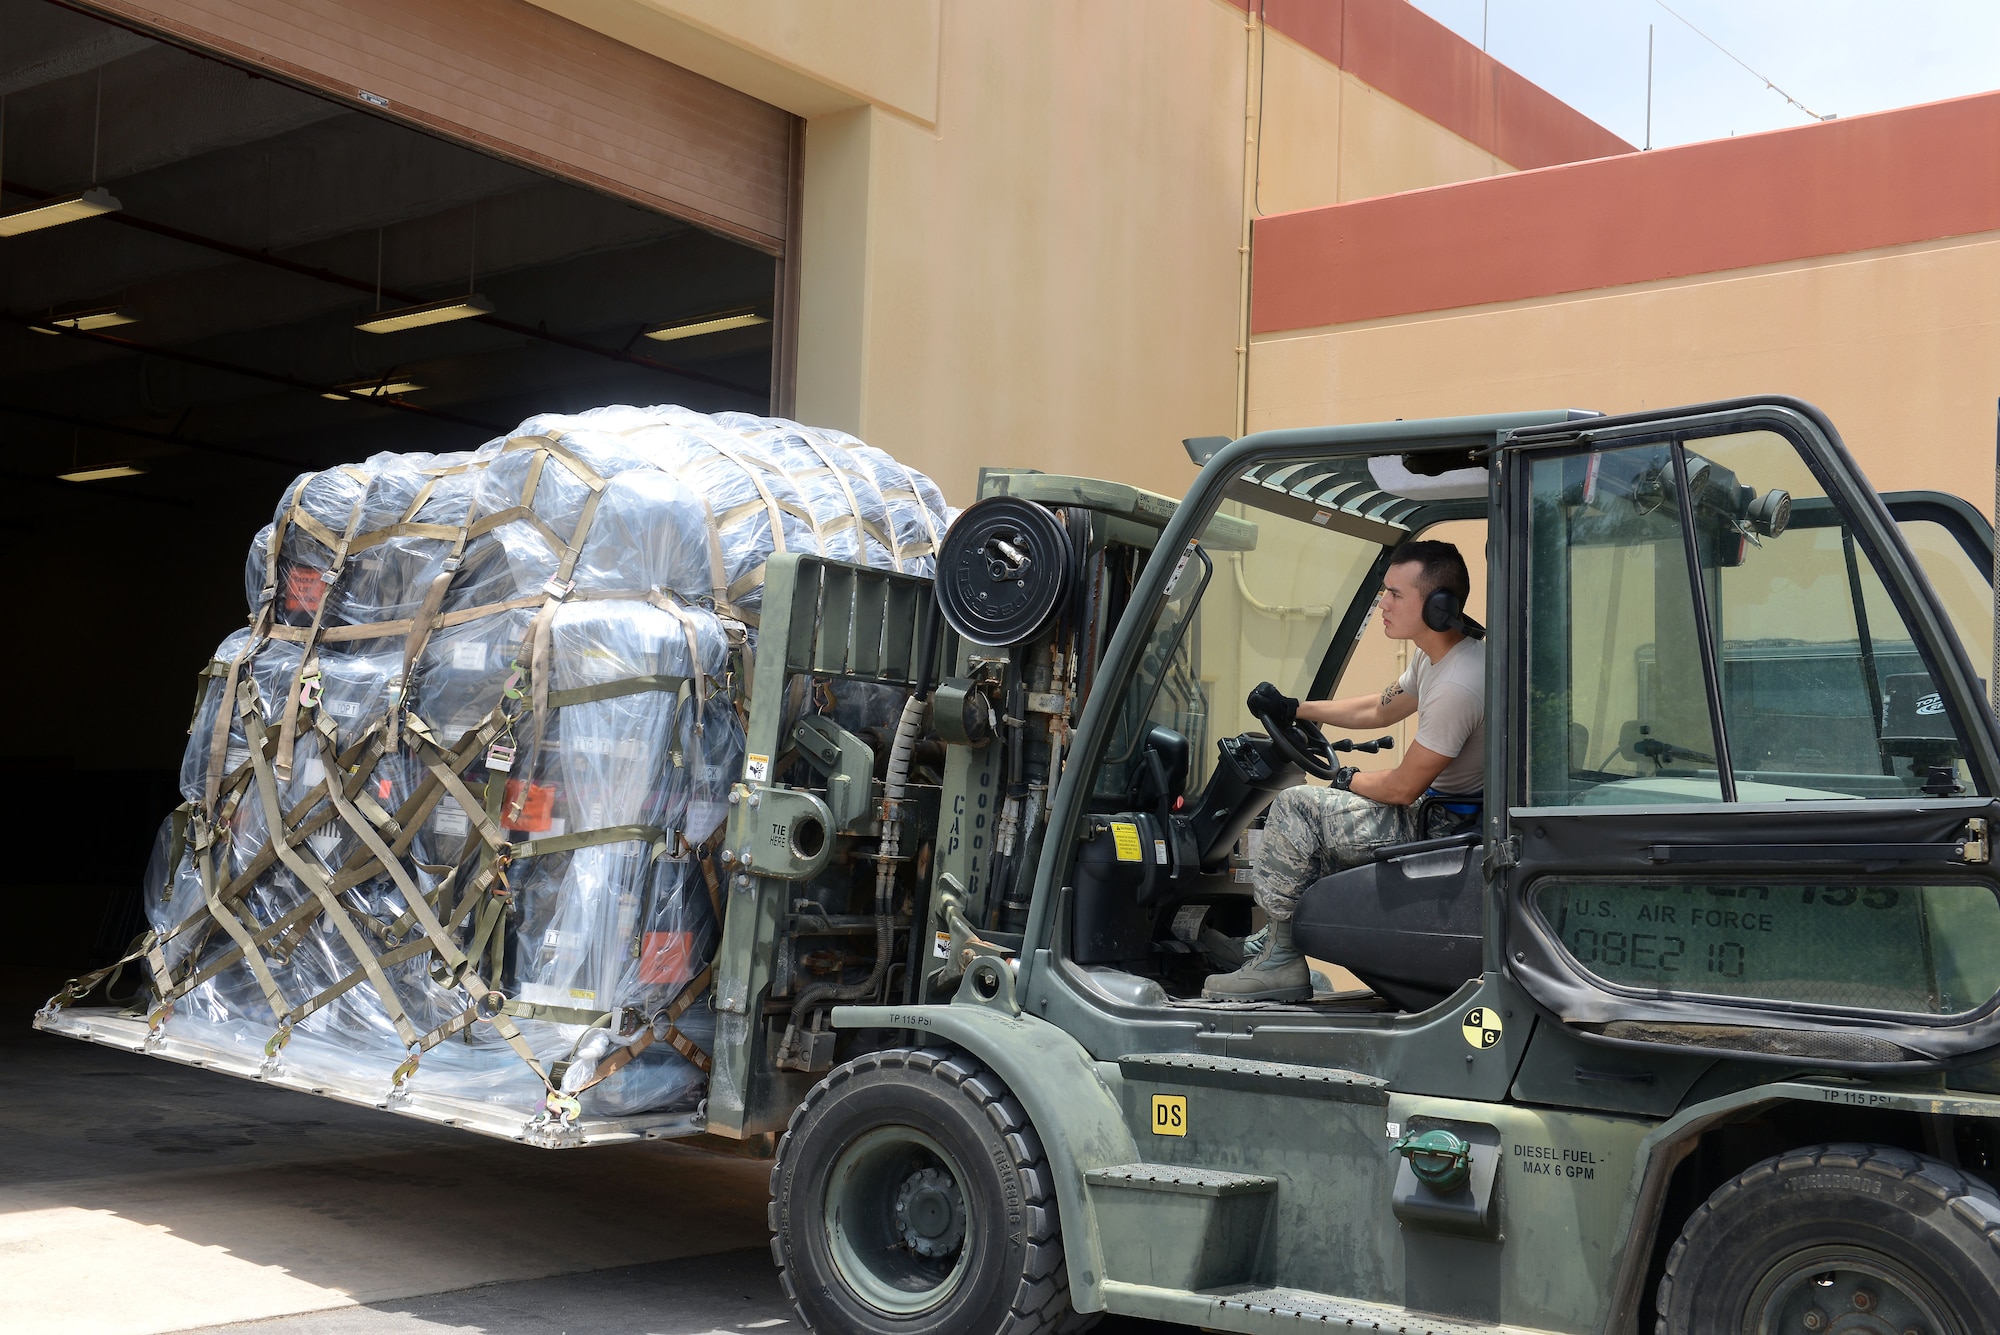 Senior Airman Austin Jeanneret, 644th Combat Communications Squadron cyber systems technician, uses a forklift to position pallets which holds communications equipment May 12, 2015, at Northwest Field, Guam. The unit is tasked with providing communication for a site that can range anywhere from 50 to 3,000 members, depending on operational needs. (U.S. Air Force photo by Airman 1st Class Arielle Vasquez/Released)